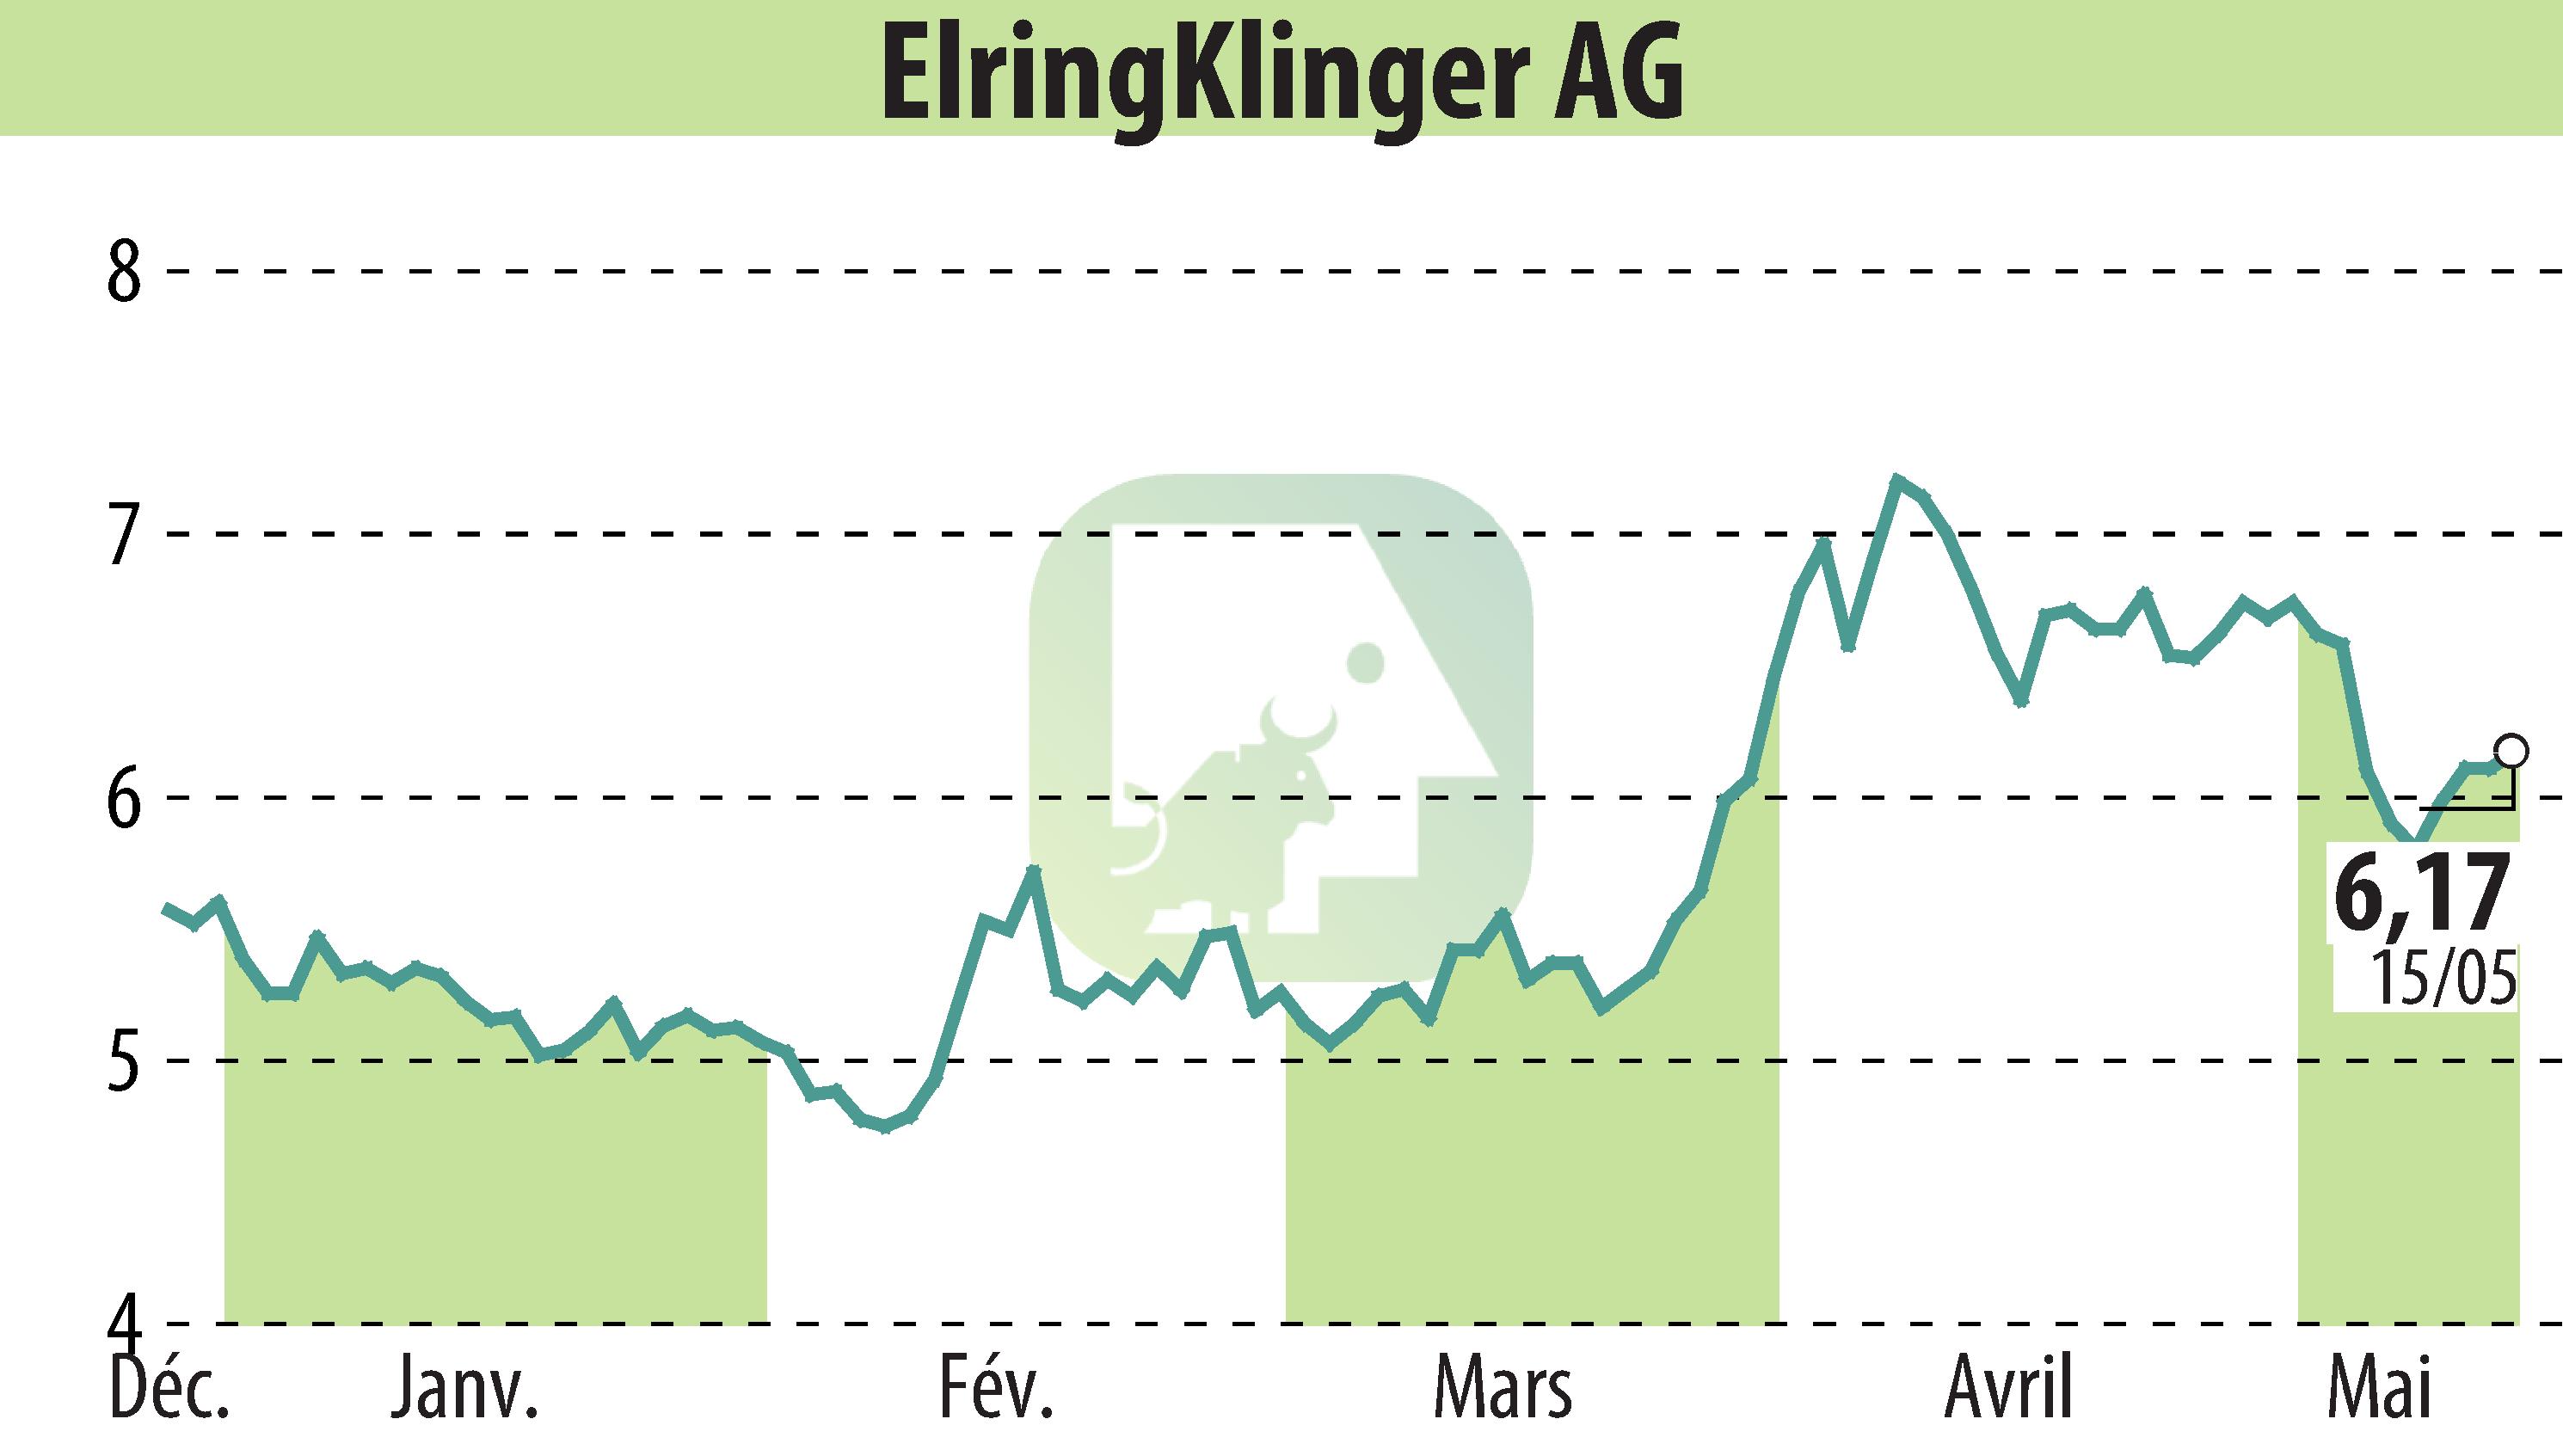 Stock price chart of ElringKlinger AG (EBR:ZIL2) showing fluctuations.